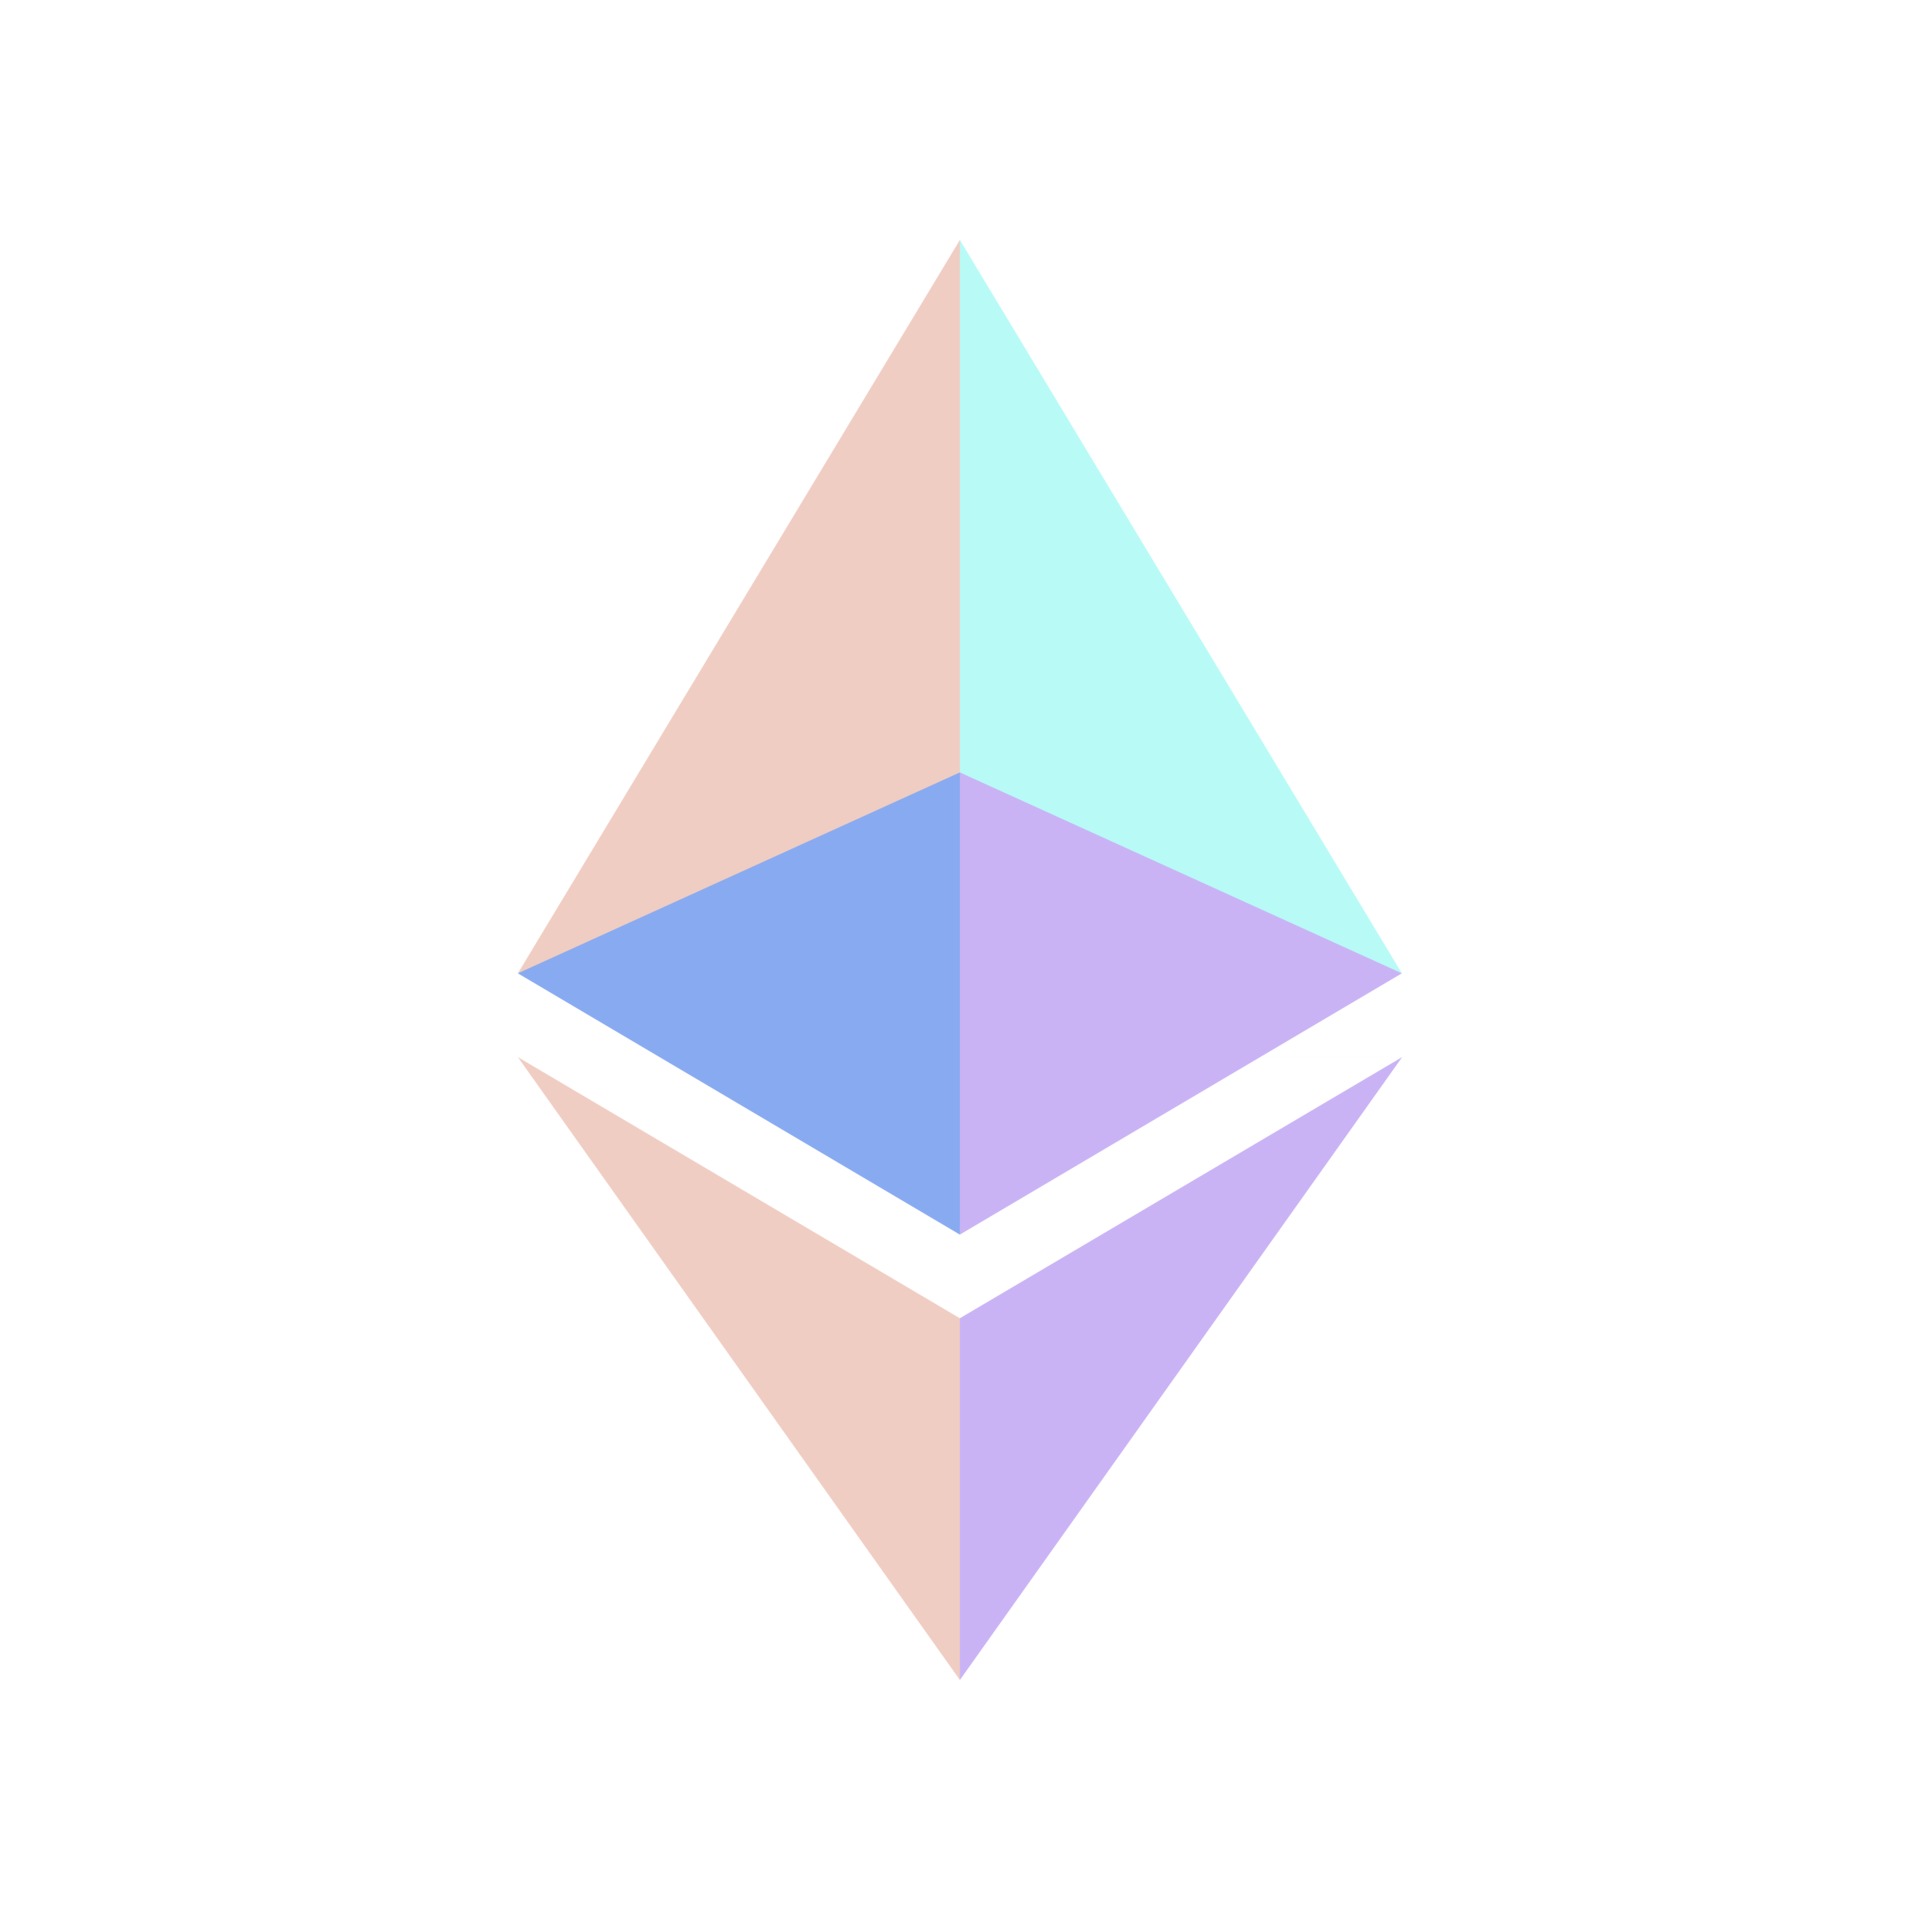 Proposal: Change Ether currency symbol from Ξ to ⧫ - Miscellaneous - Ethereum Research